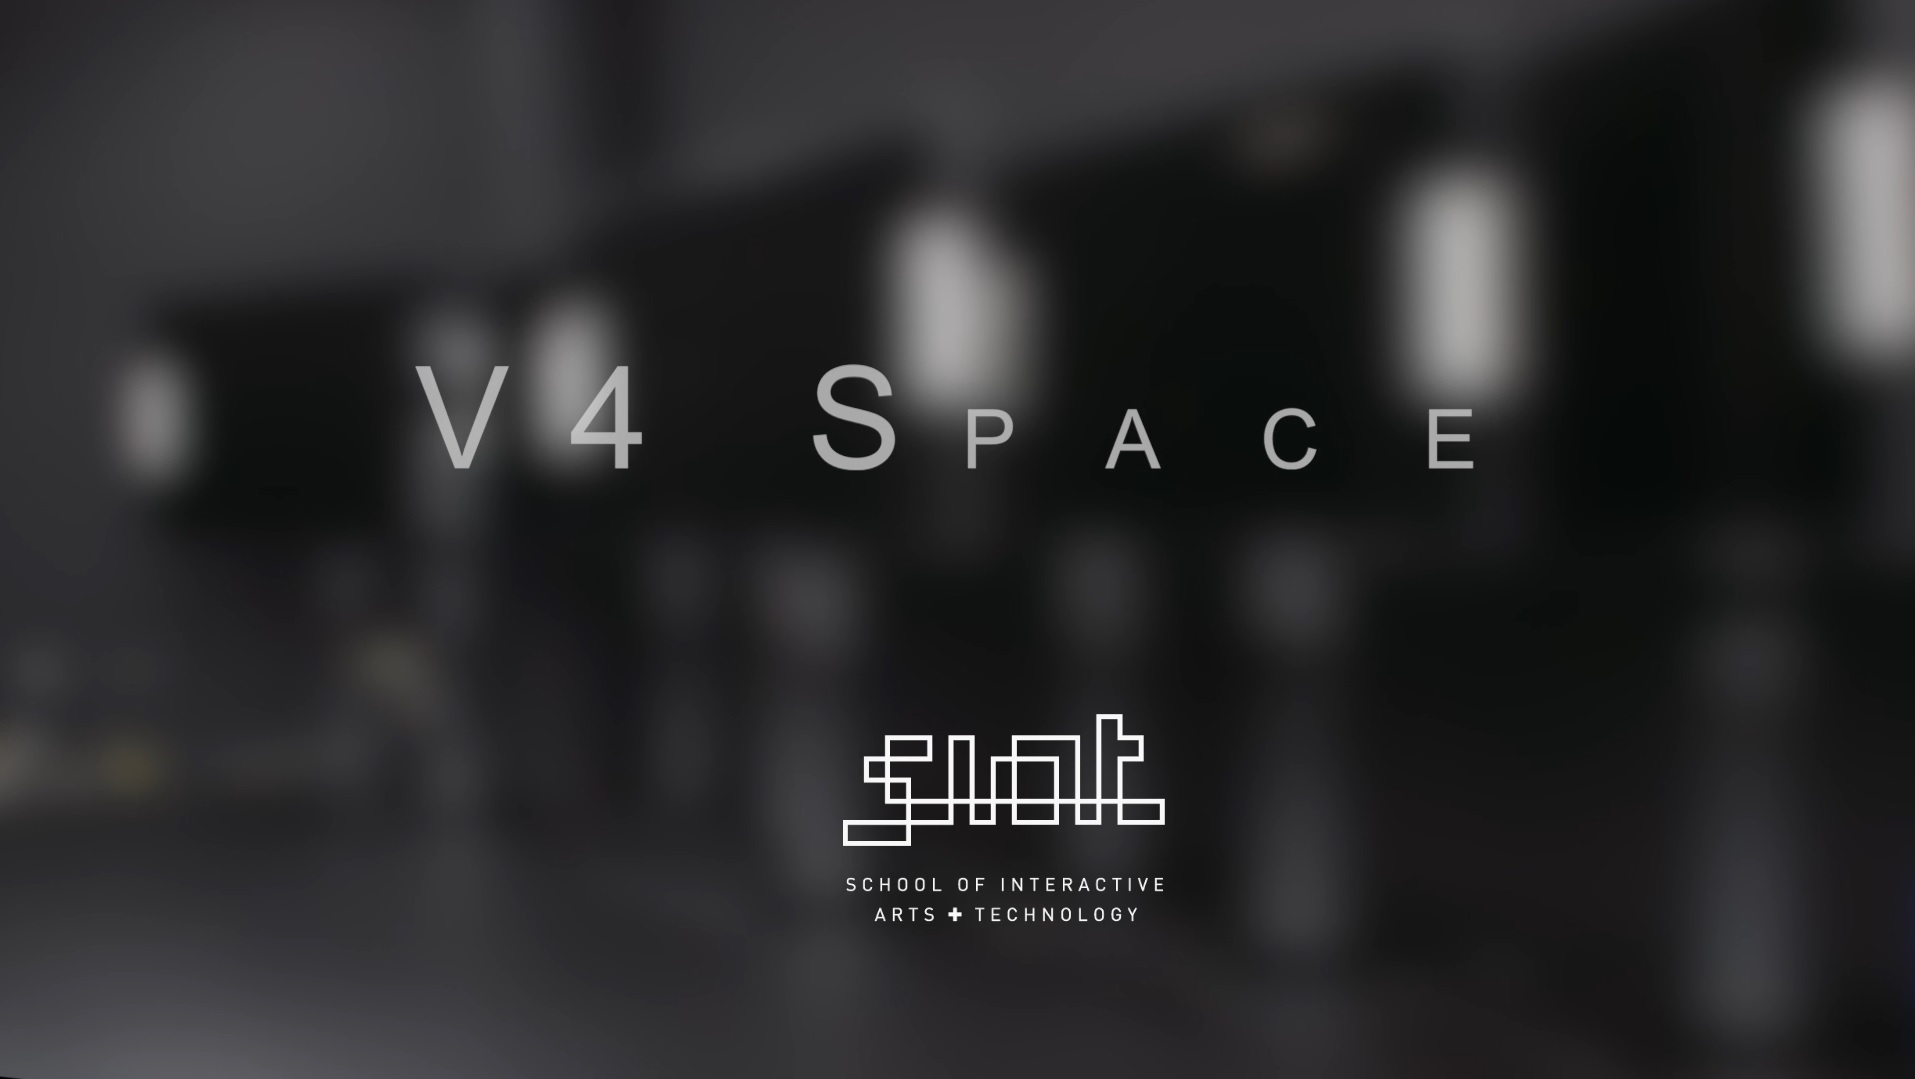 Title of V4Space Project with SIAT logo